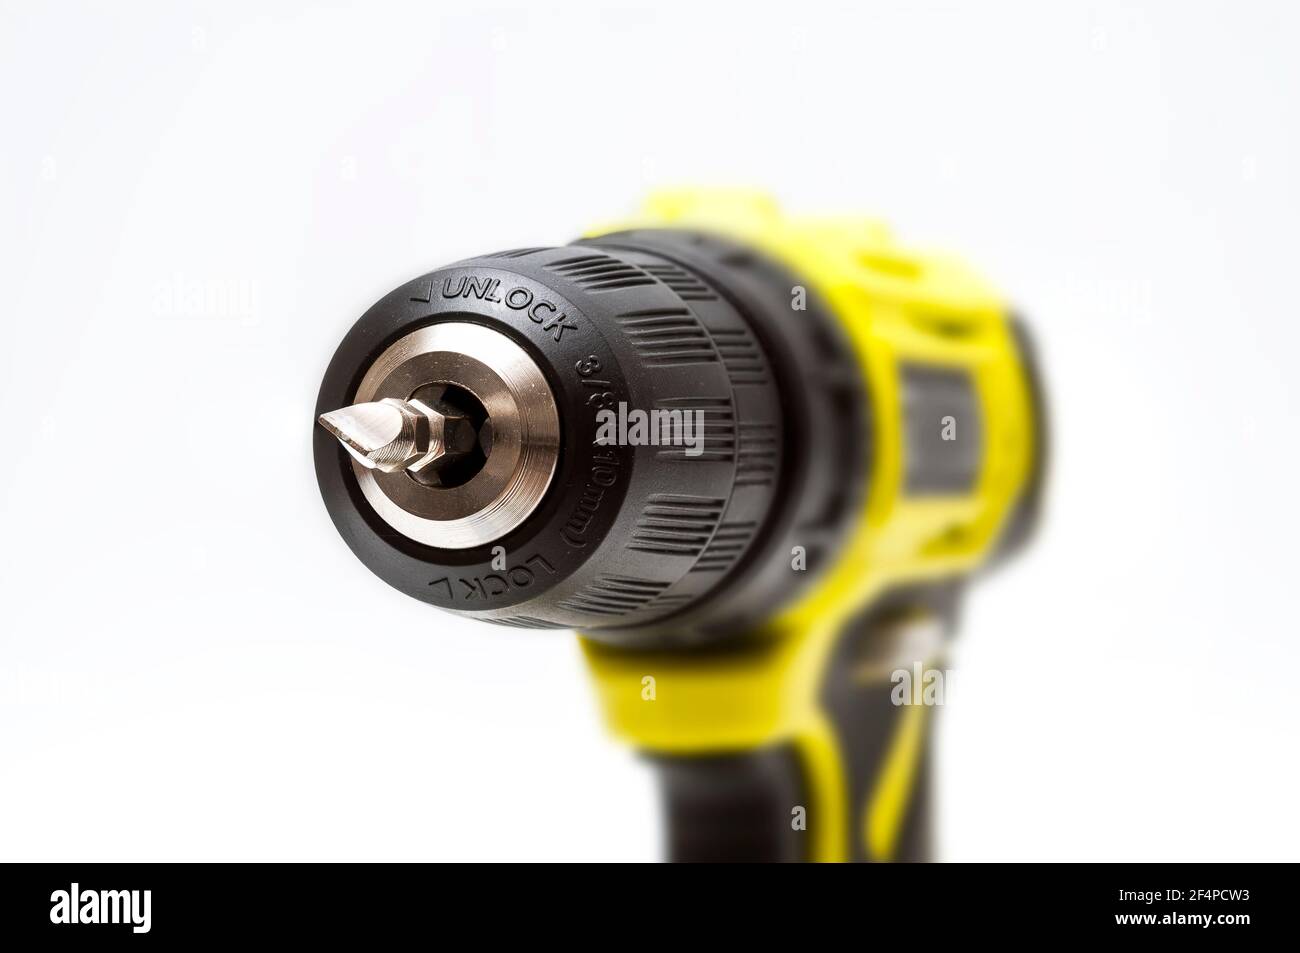 Ryobi 3/8 cordless electric drill showing a closeup of 3-jawed chuck with  a Phillips screw driver bit inserted Stock Photo - Alamy